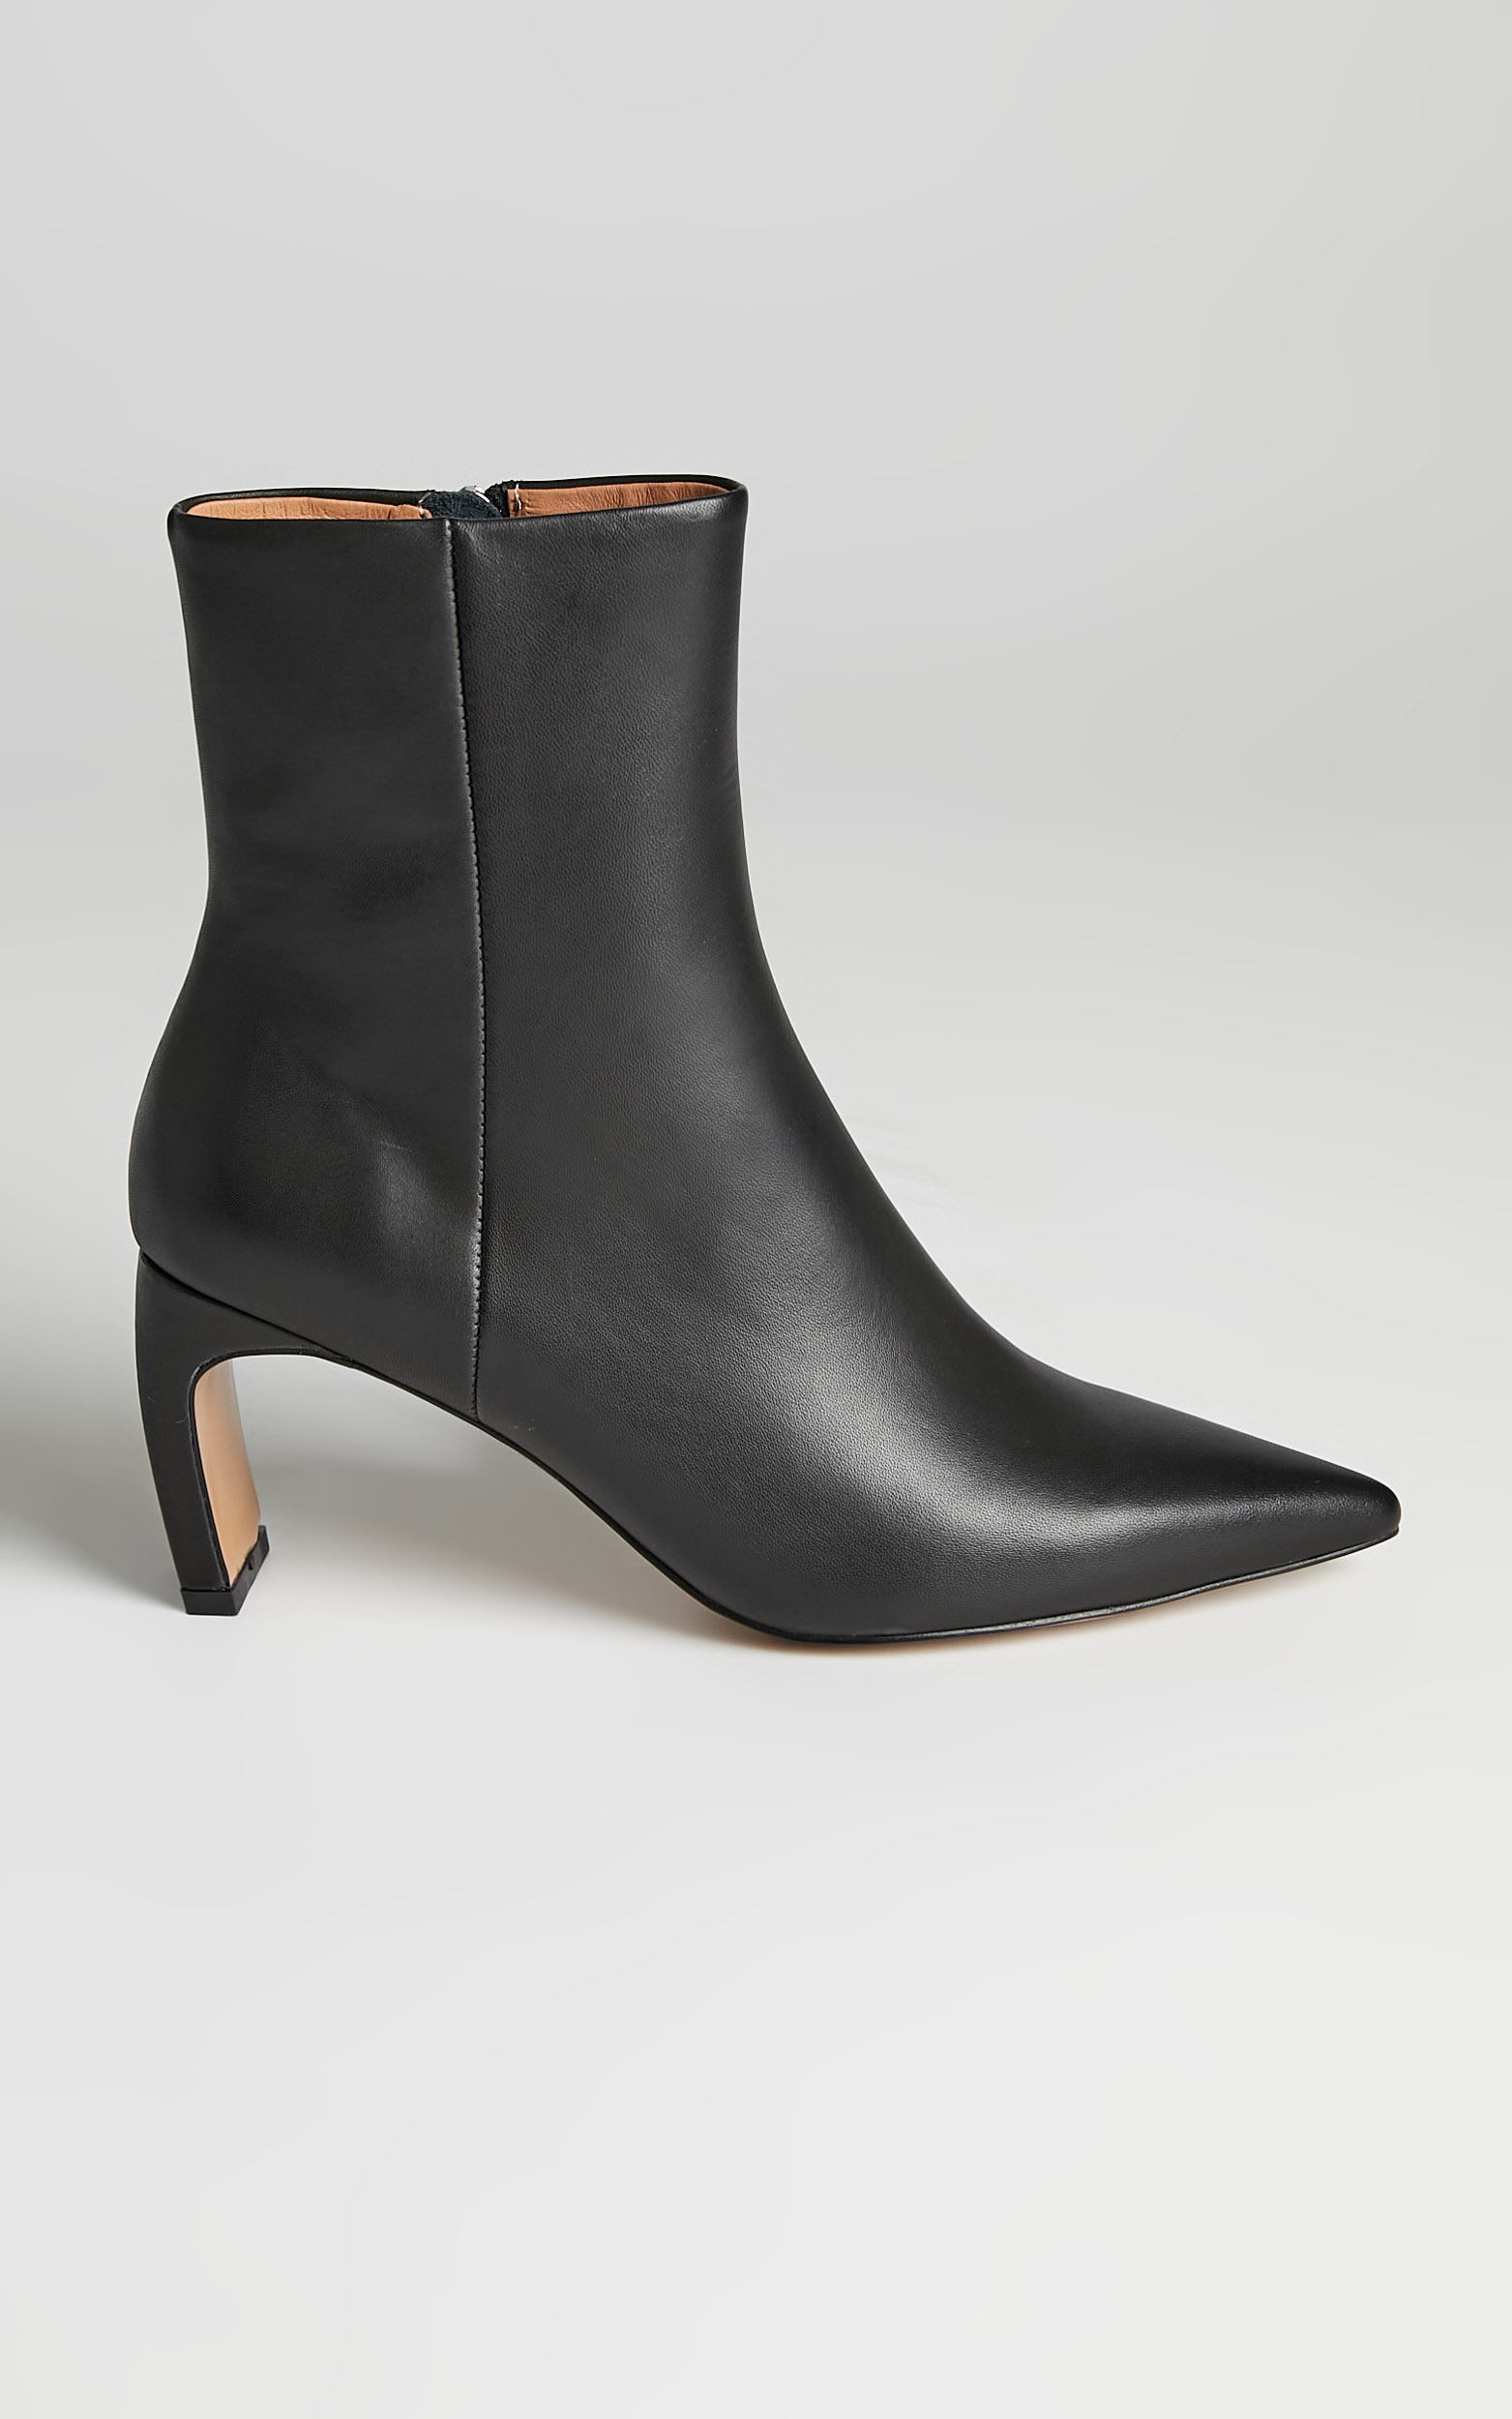 Alias Mae - Jameen Boots in Black Burnished - 10.5, BLK1, hi-res image number null